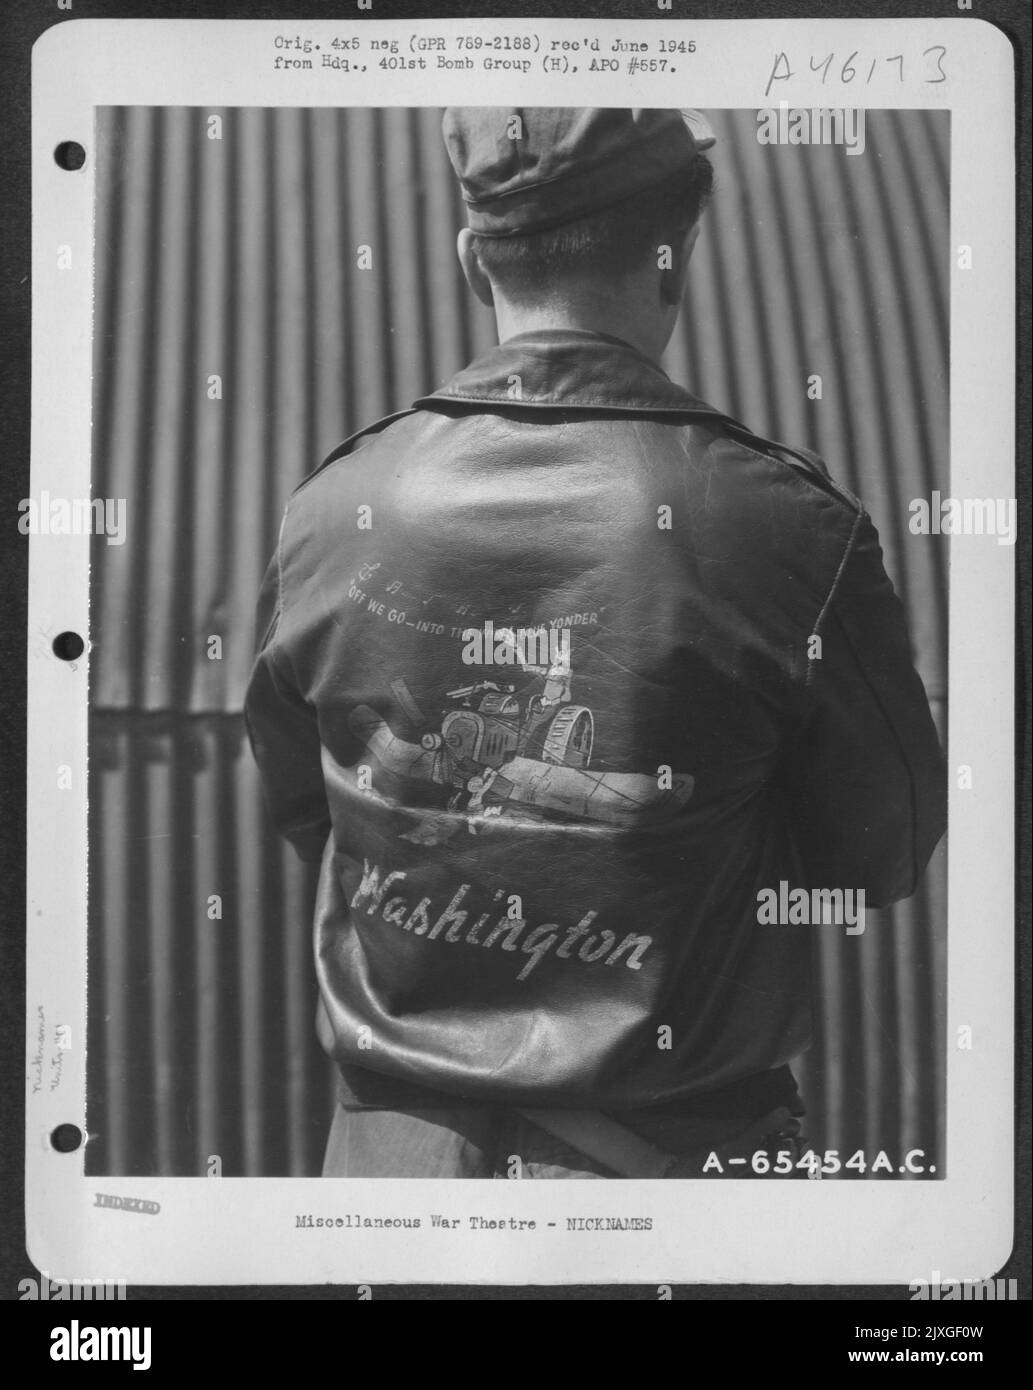 Leather Jacket Worn By Crew Mwmbers Of The Boeing B-17 